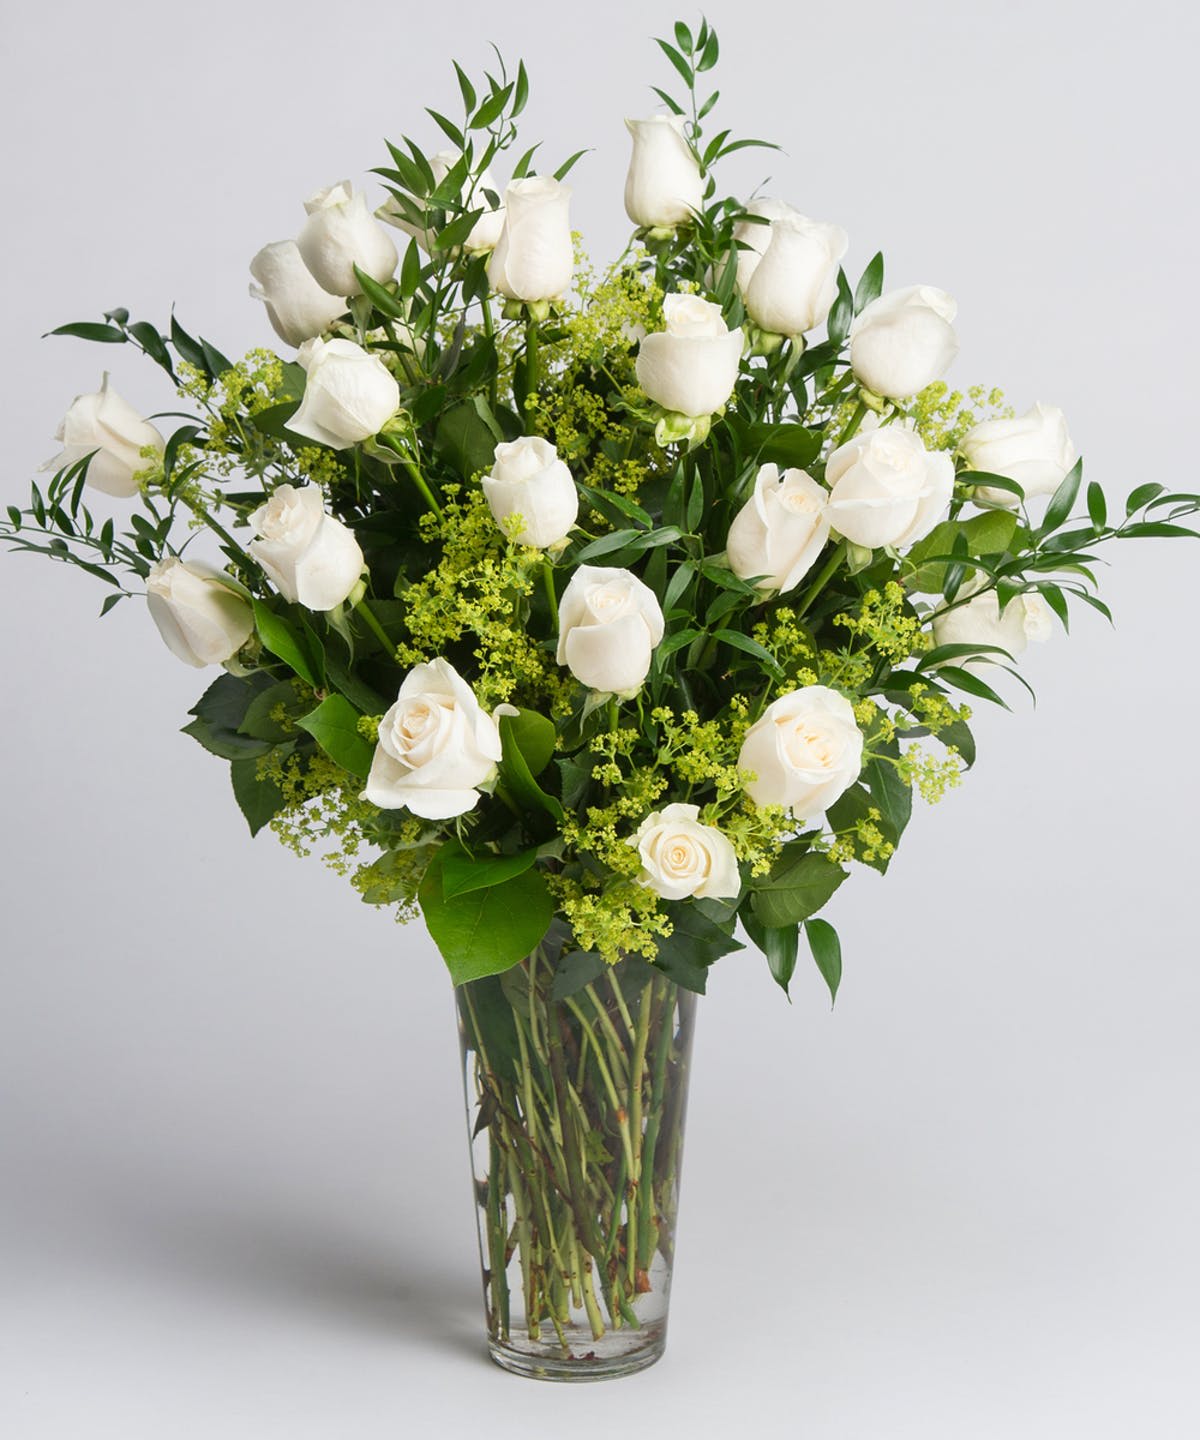 Blanc de Blanc Roses - An elegant arrangement of all premium white long stem white roses with simple greenery and filler. 